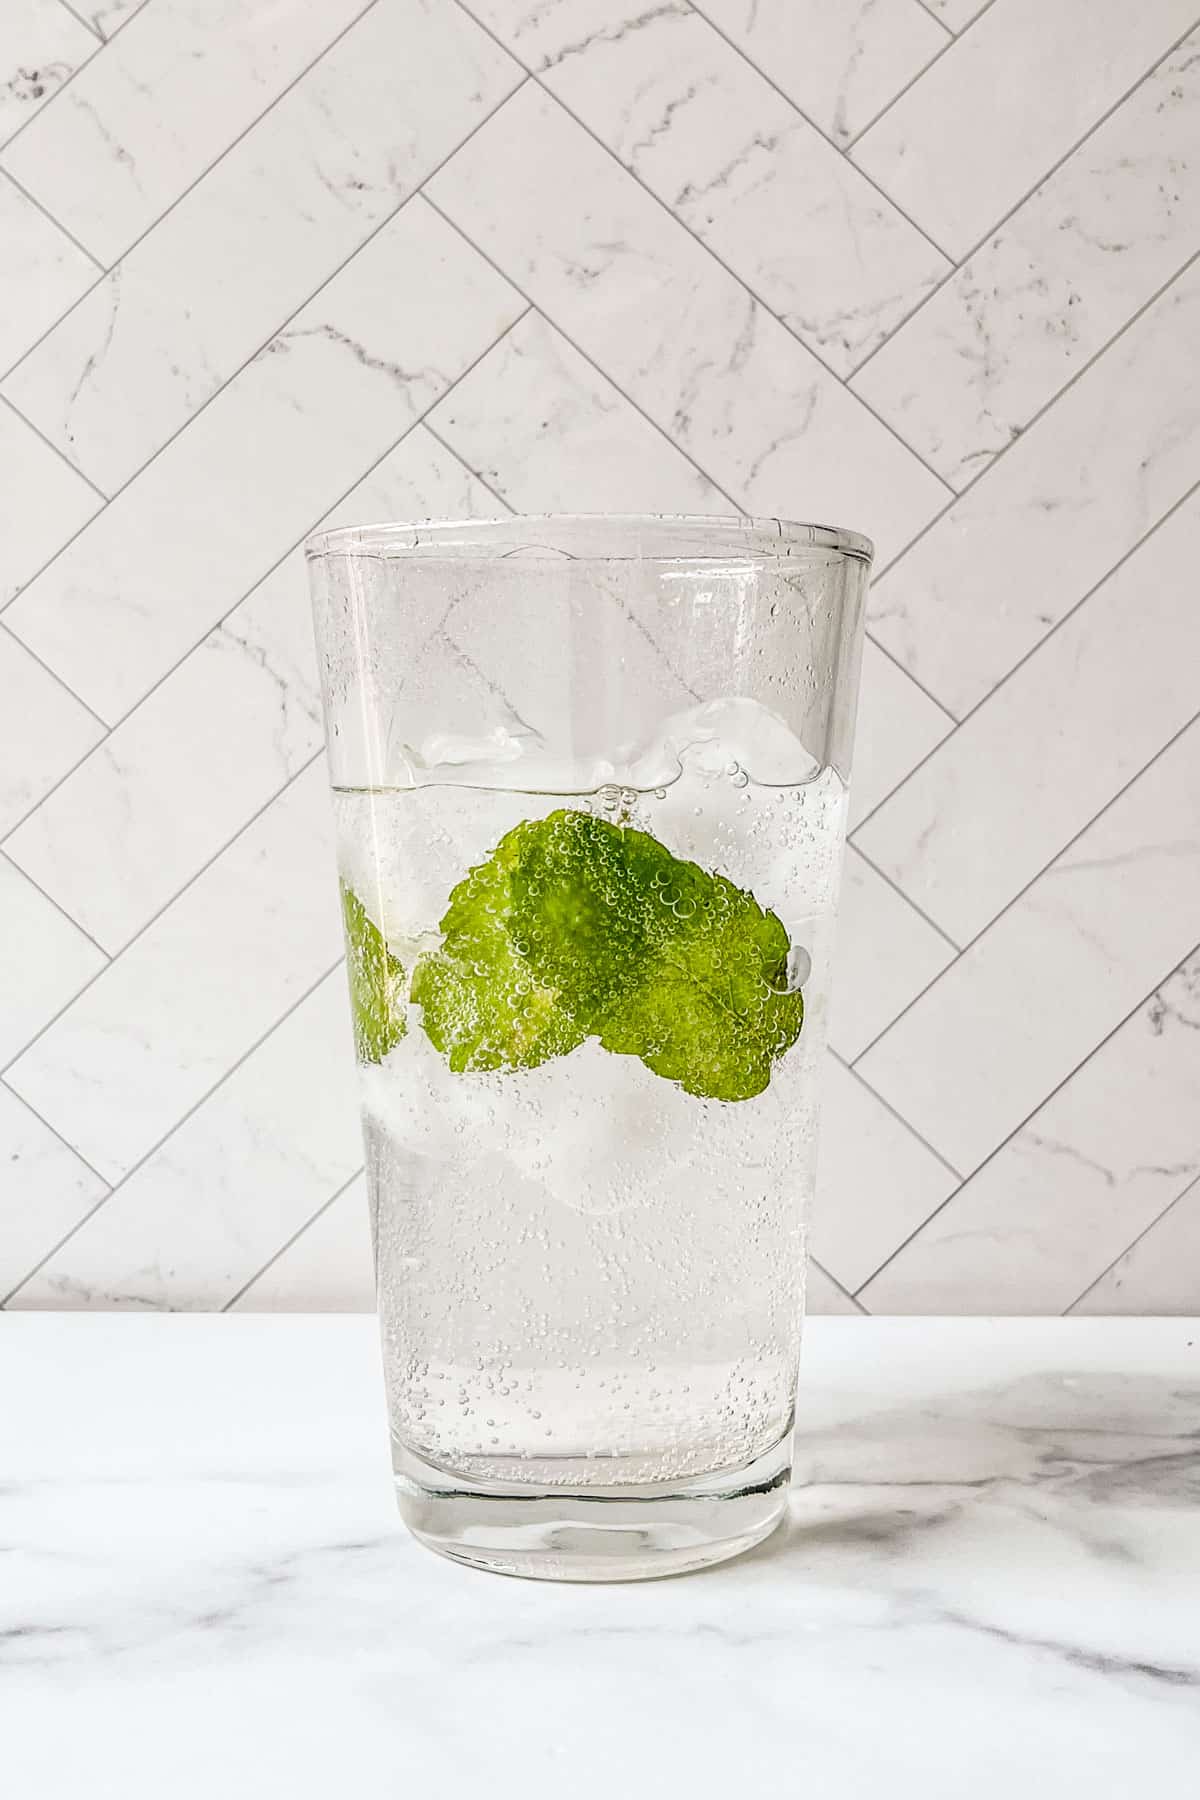 Mint, ice, and tonic water in a glass.